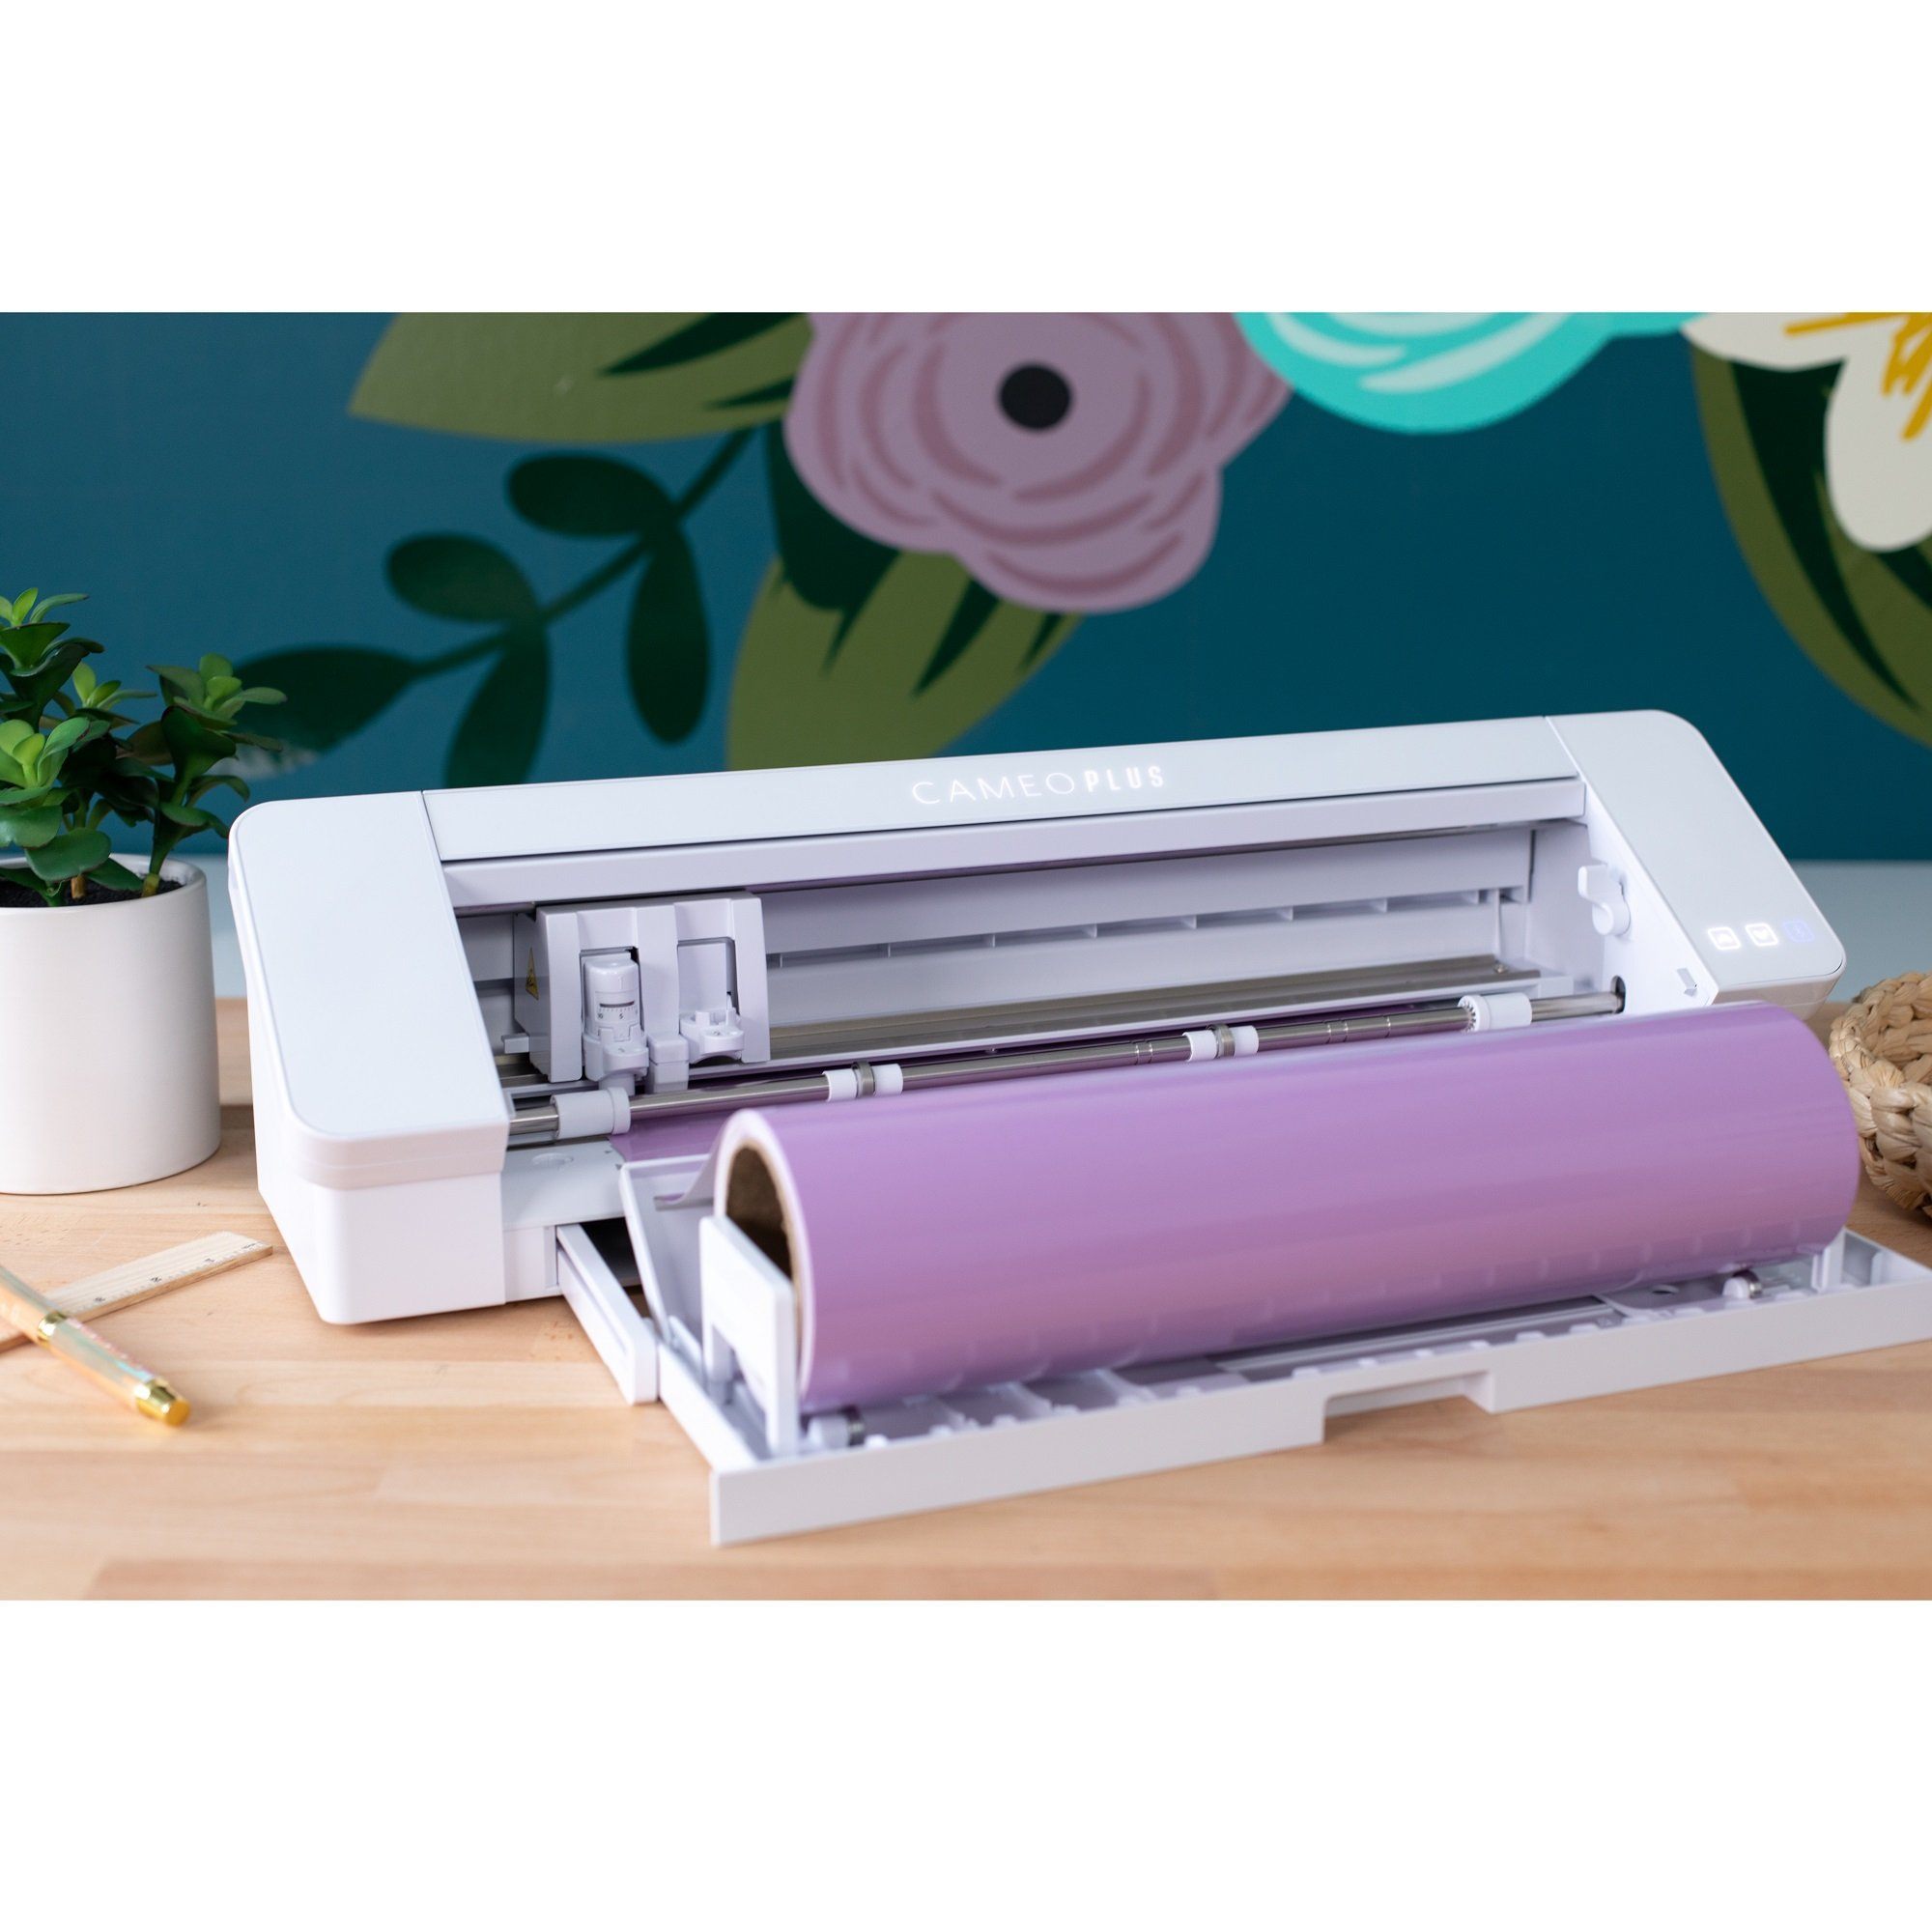 Silhouette Cameo 4 PLUS 15 with 38 Sheets Oracal Vinyl, HTV, Pens, Guides  